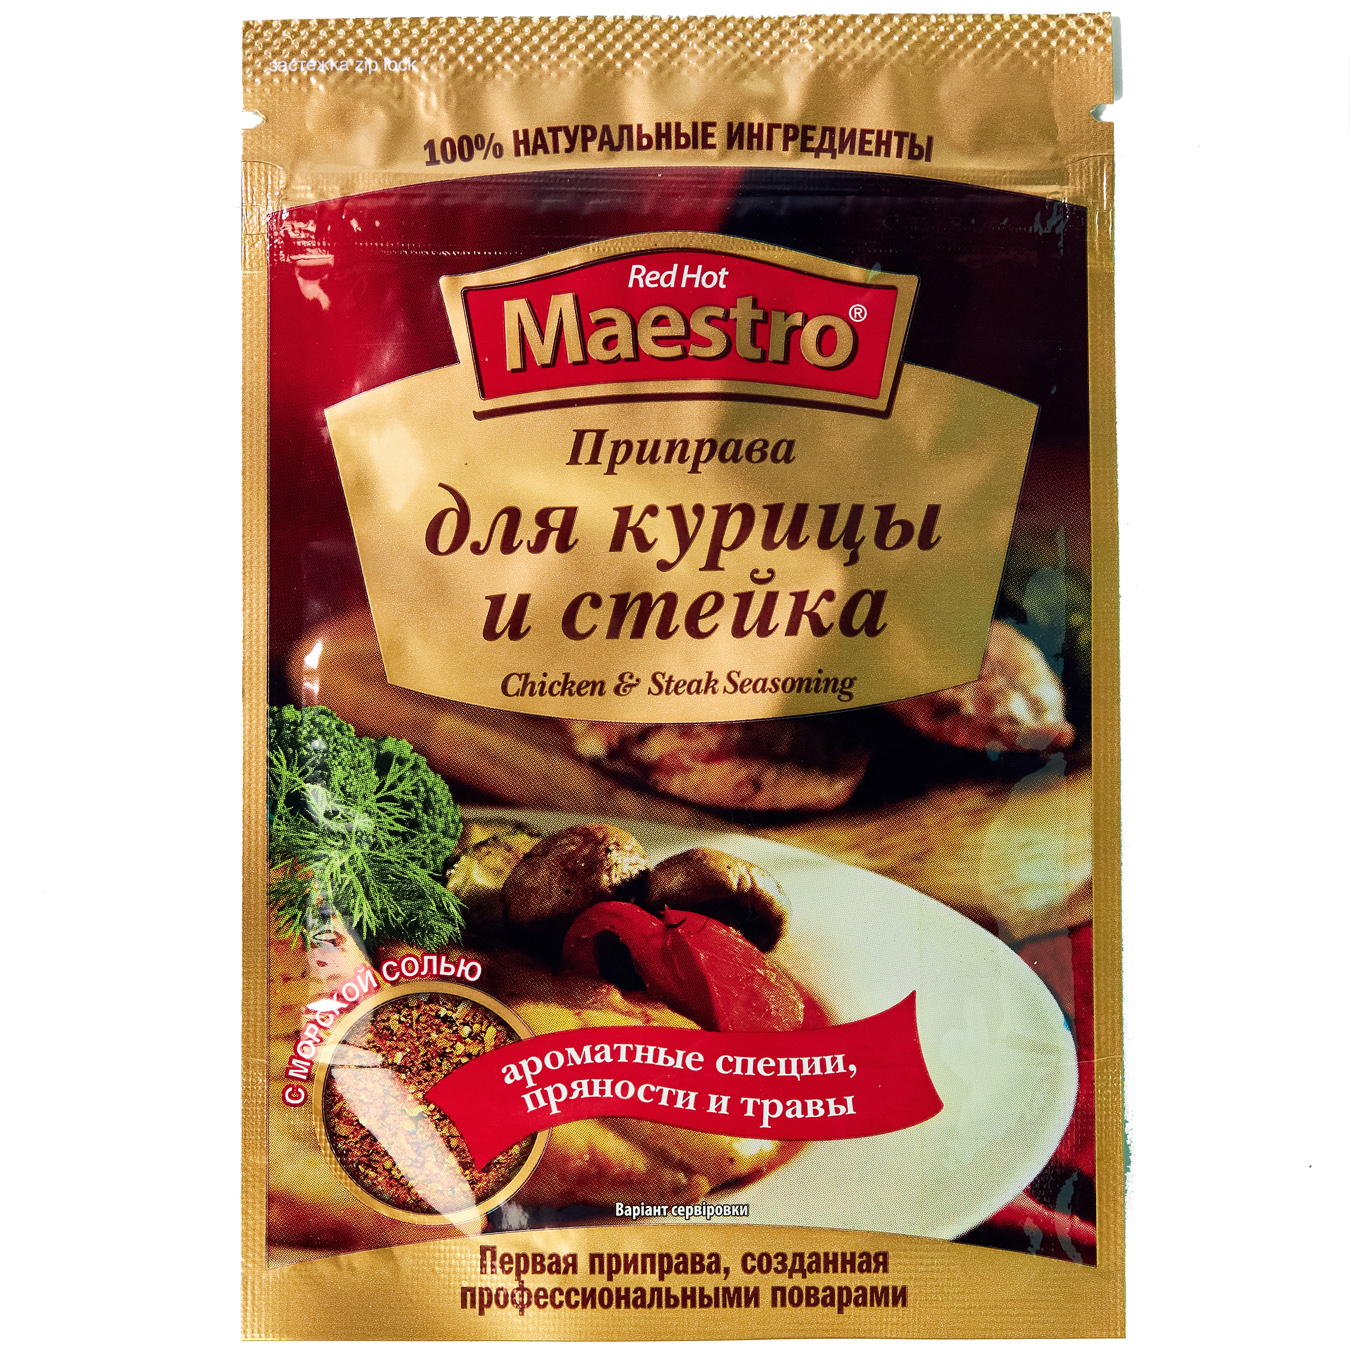 Red Hot Maestro Spice for Chicken and Steak 25g